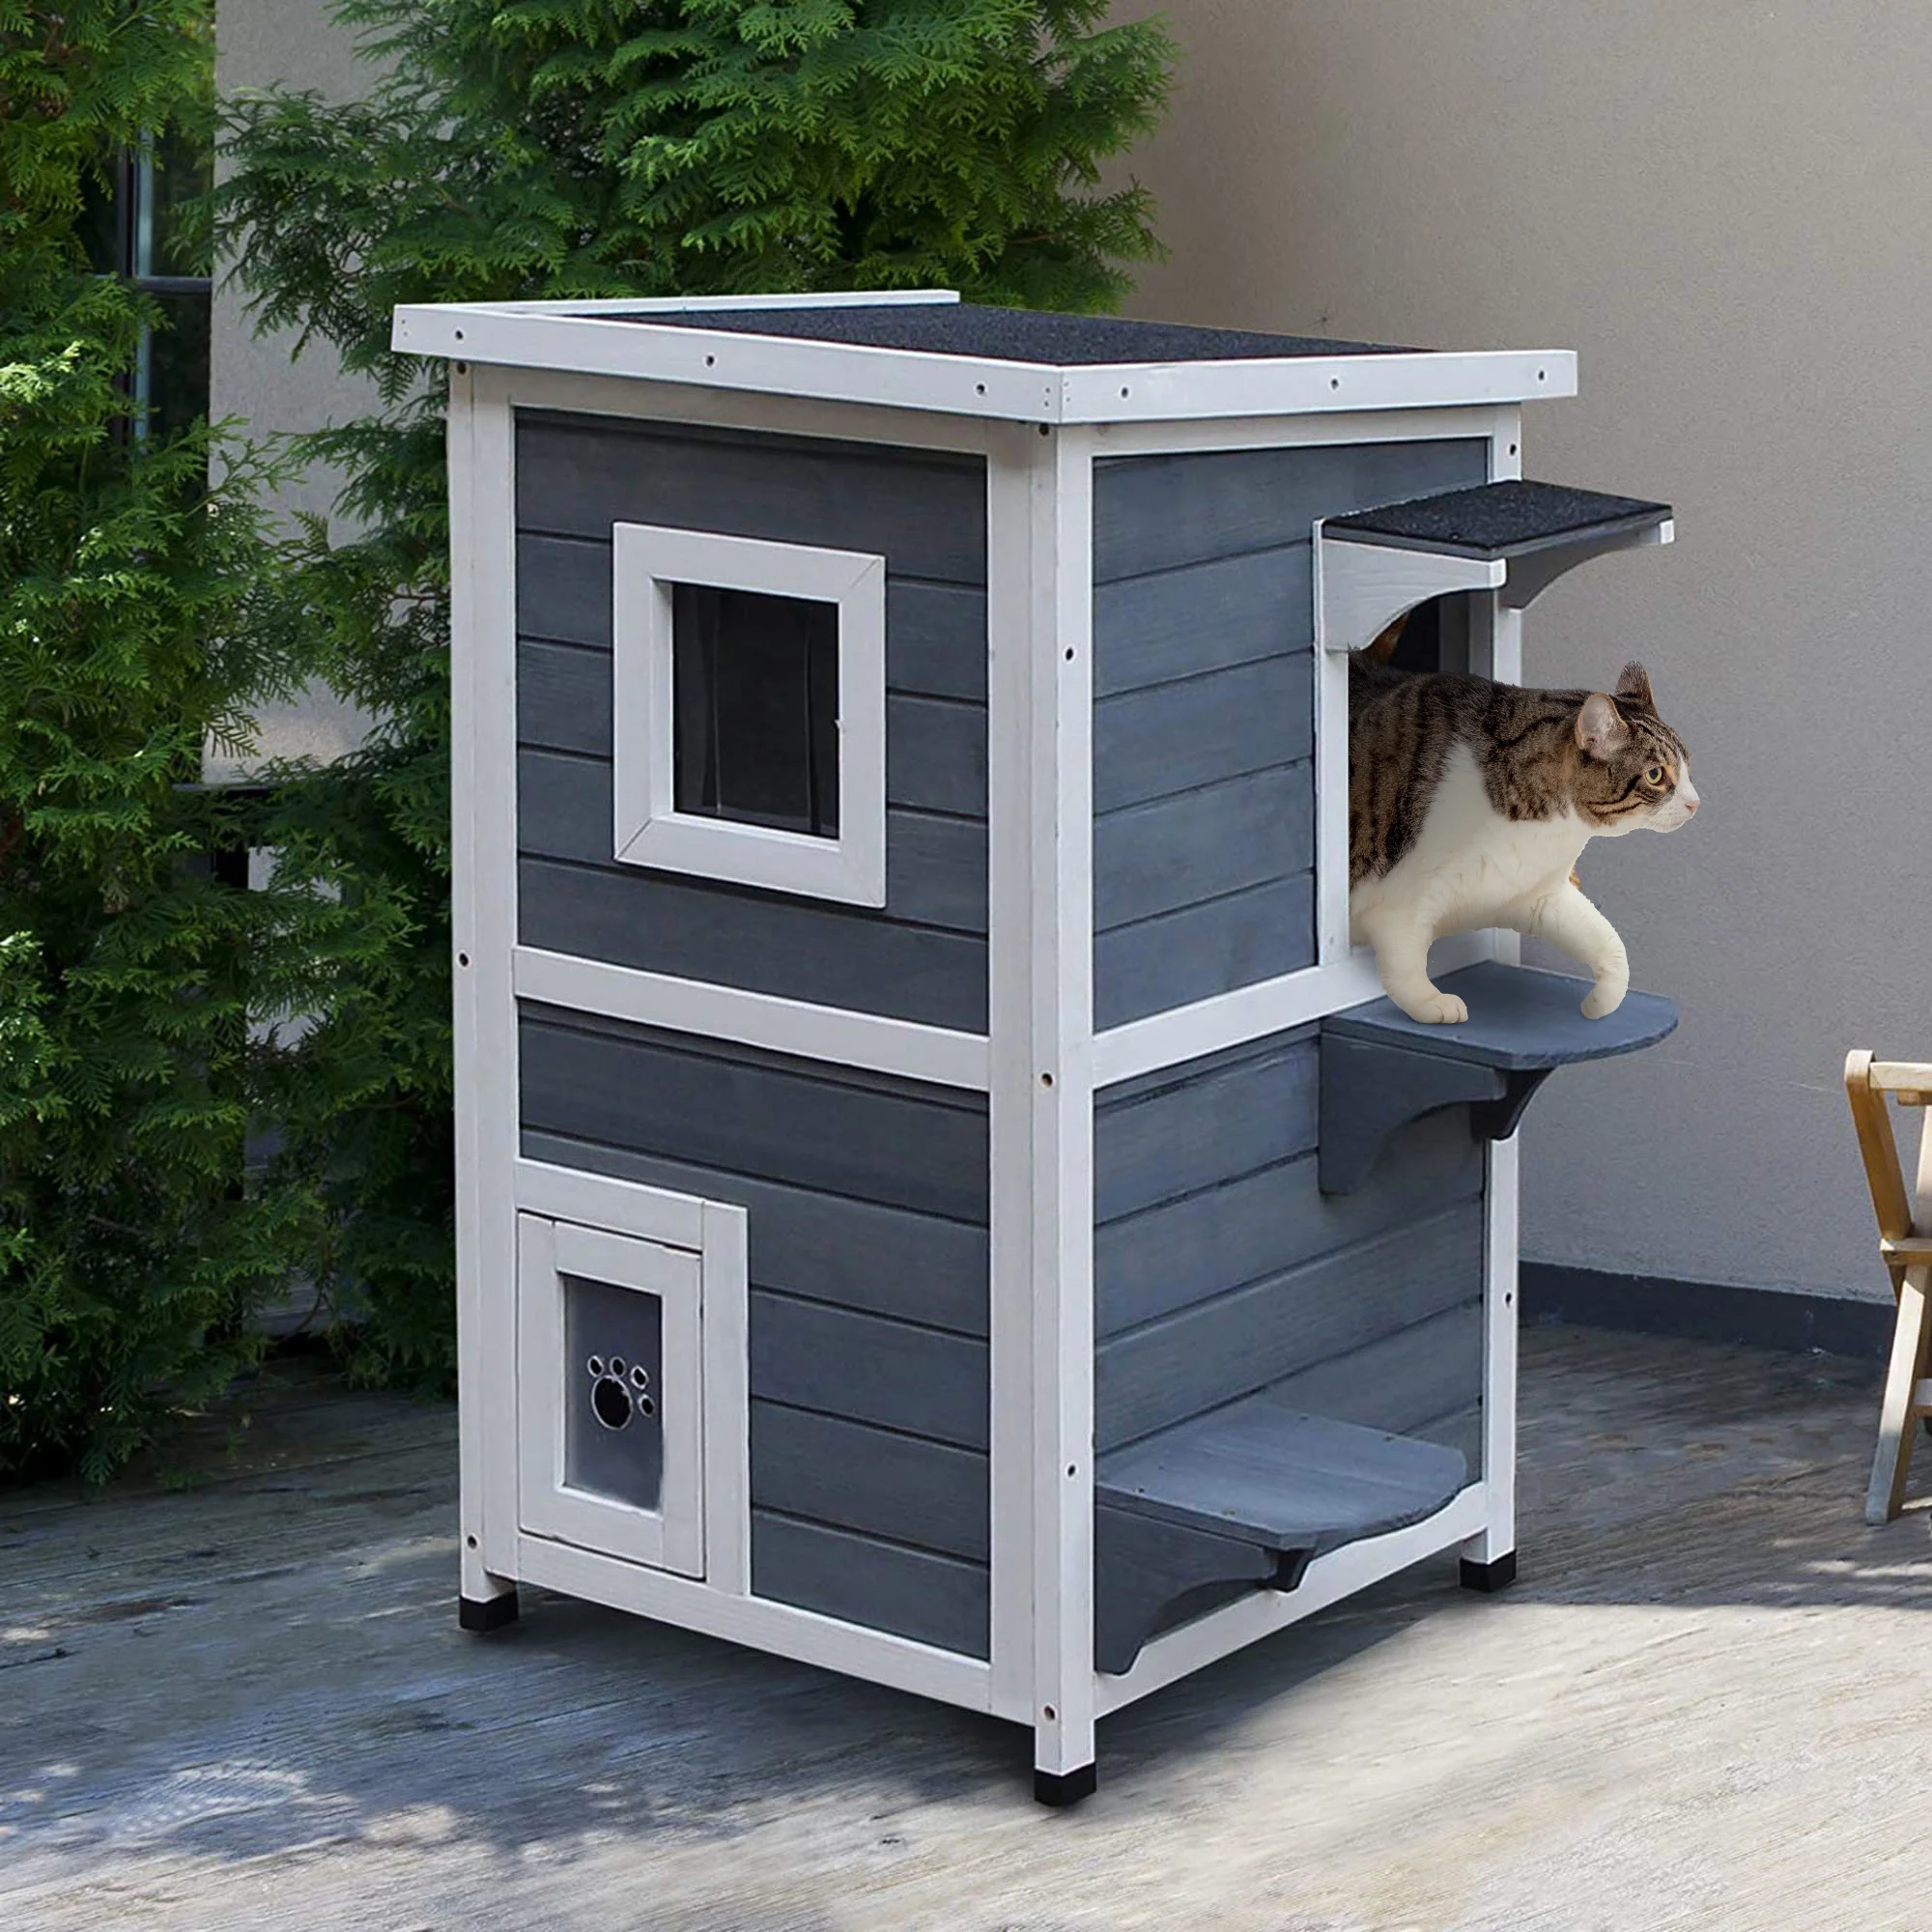 2-Story Wooden Cat House Cat Shelter with Stairs and Balcony Indoor/Outdoor 20.08 L x 20.08 W x 17.99 H inches 